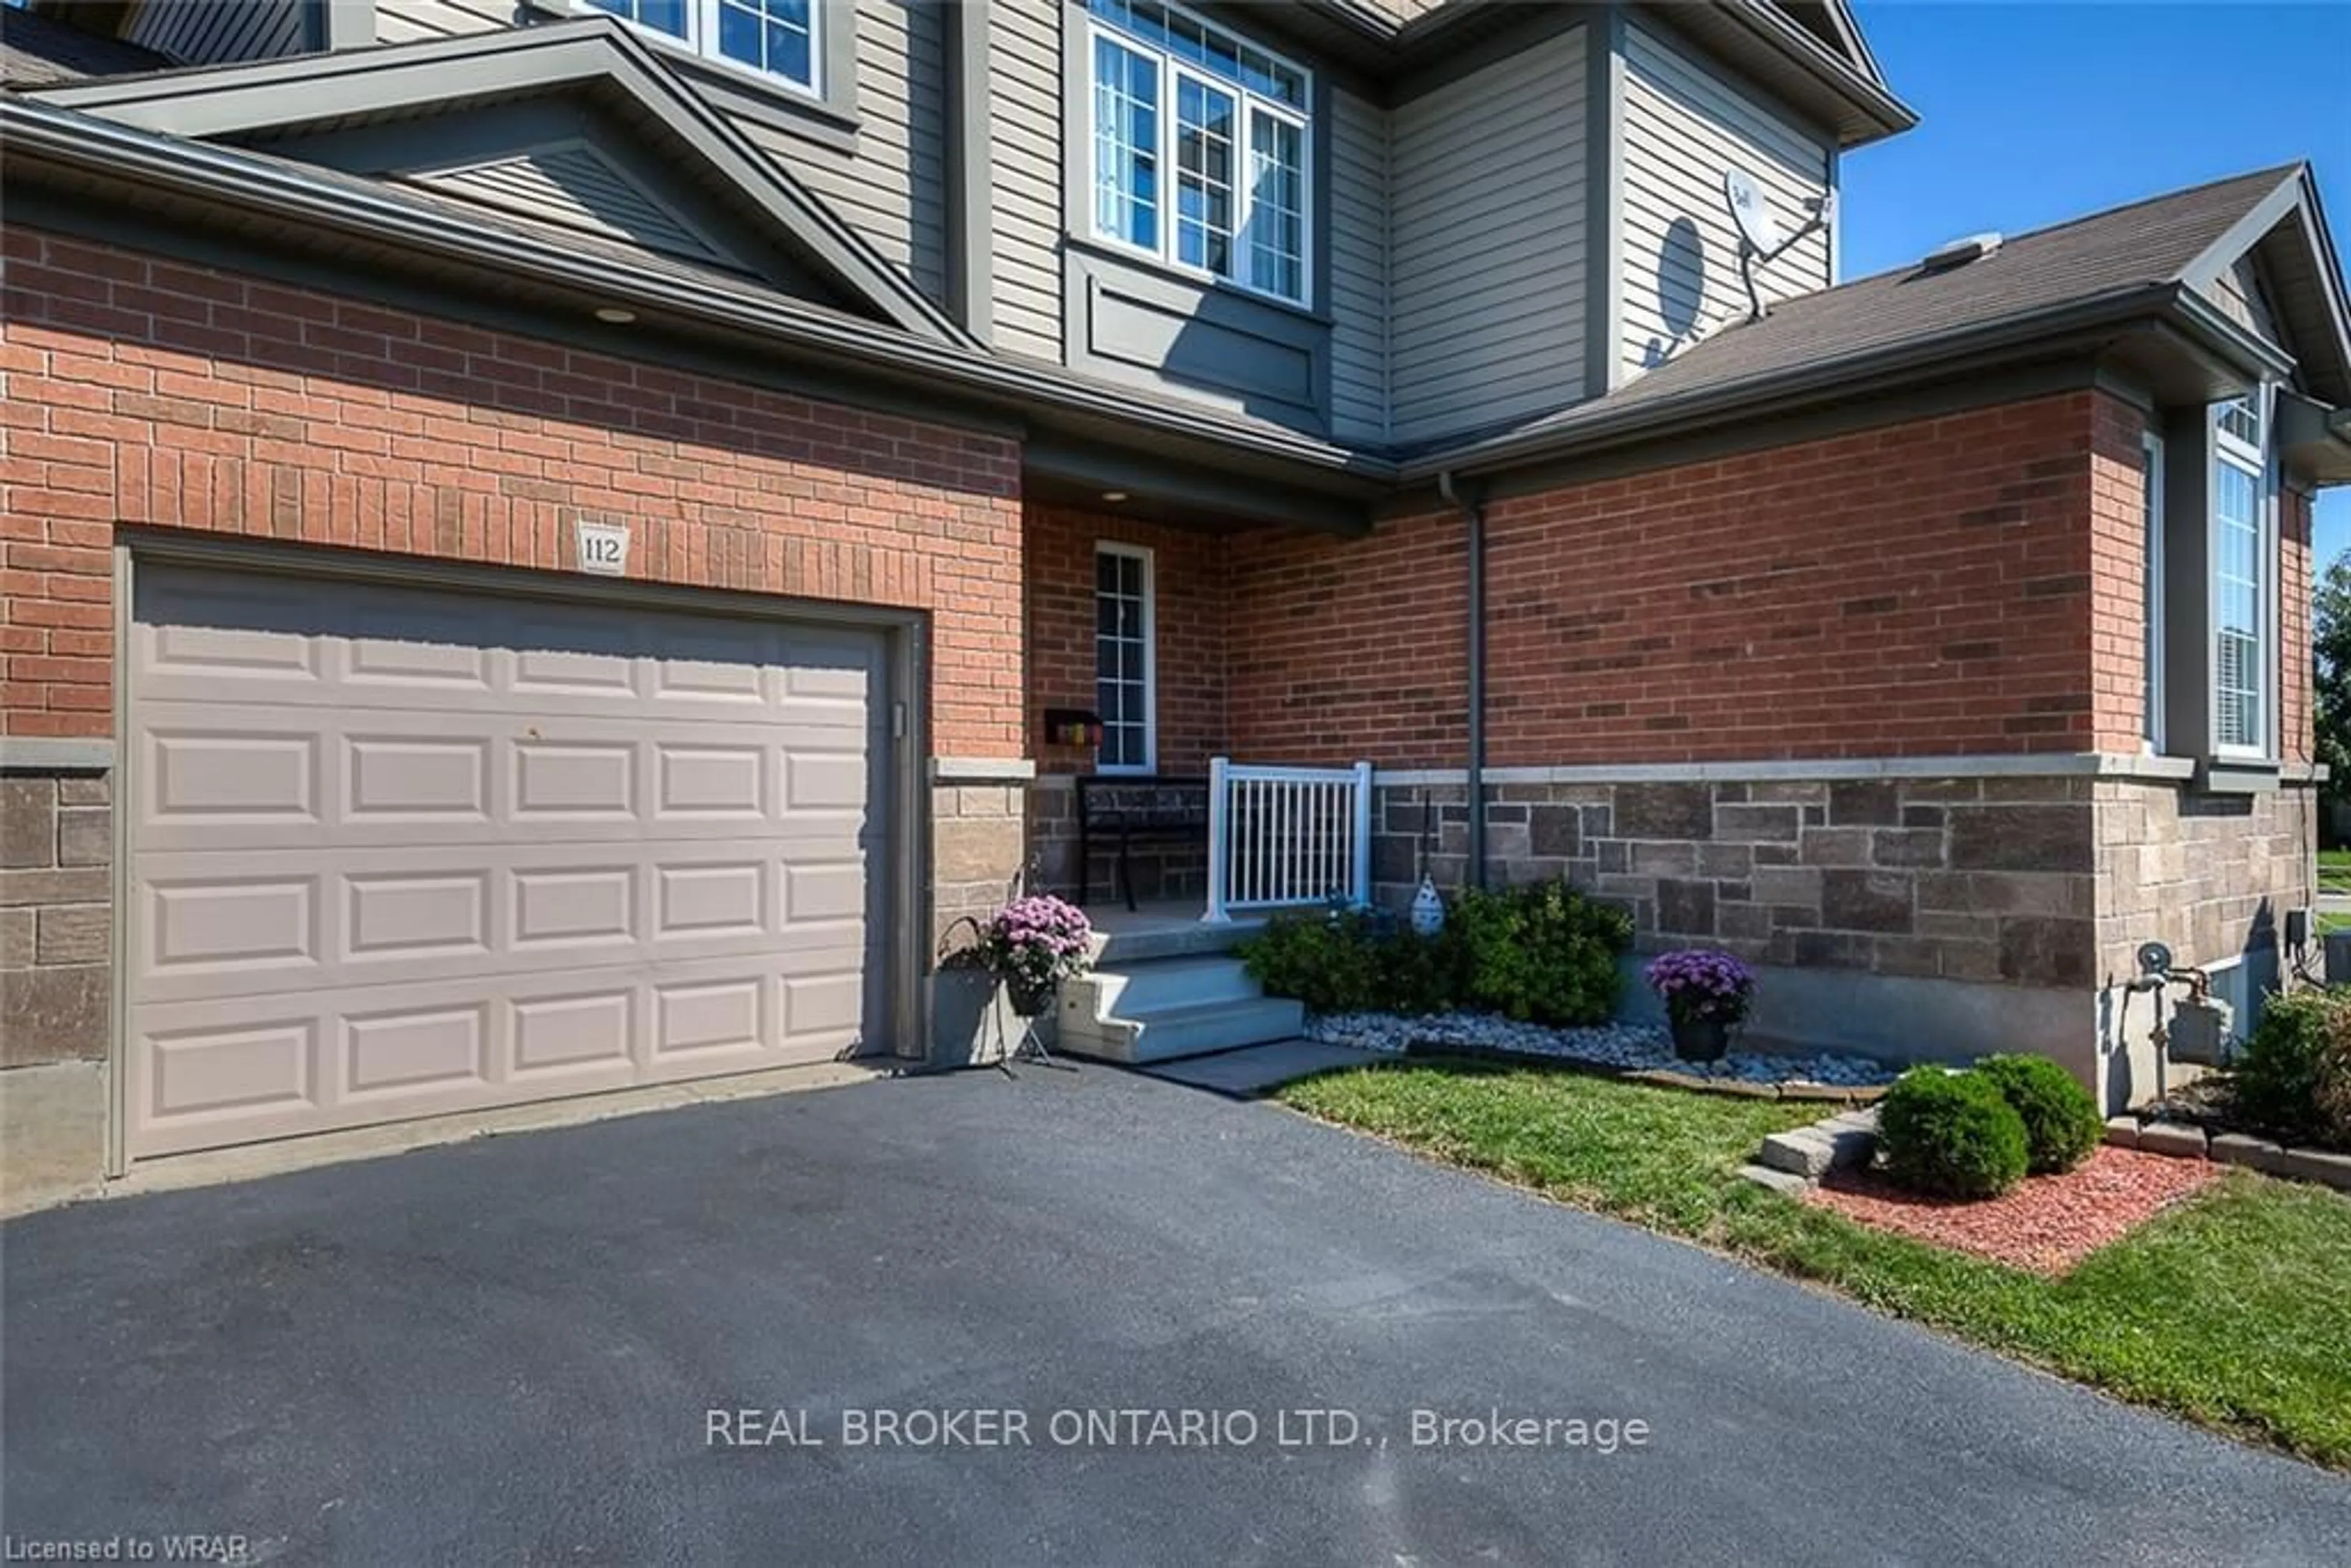 Home with brick exterior material for 112 Oakcliffe St, Woolwich Ontario N3B 3L9